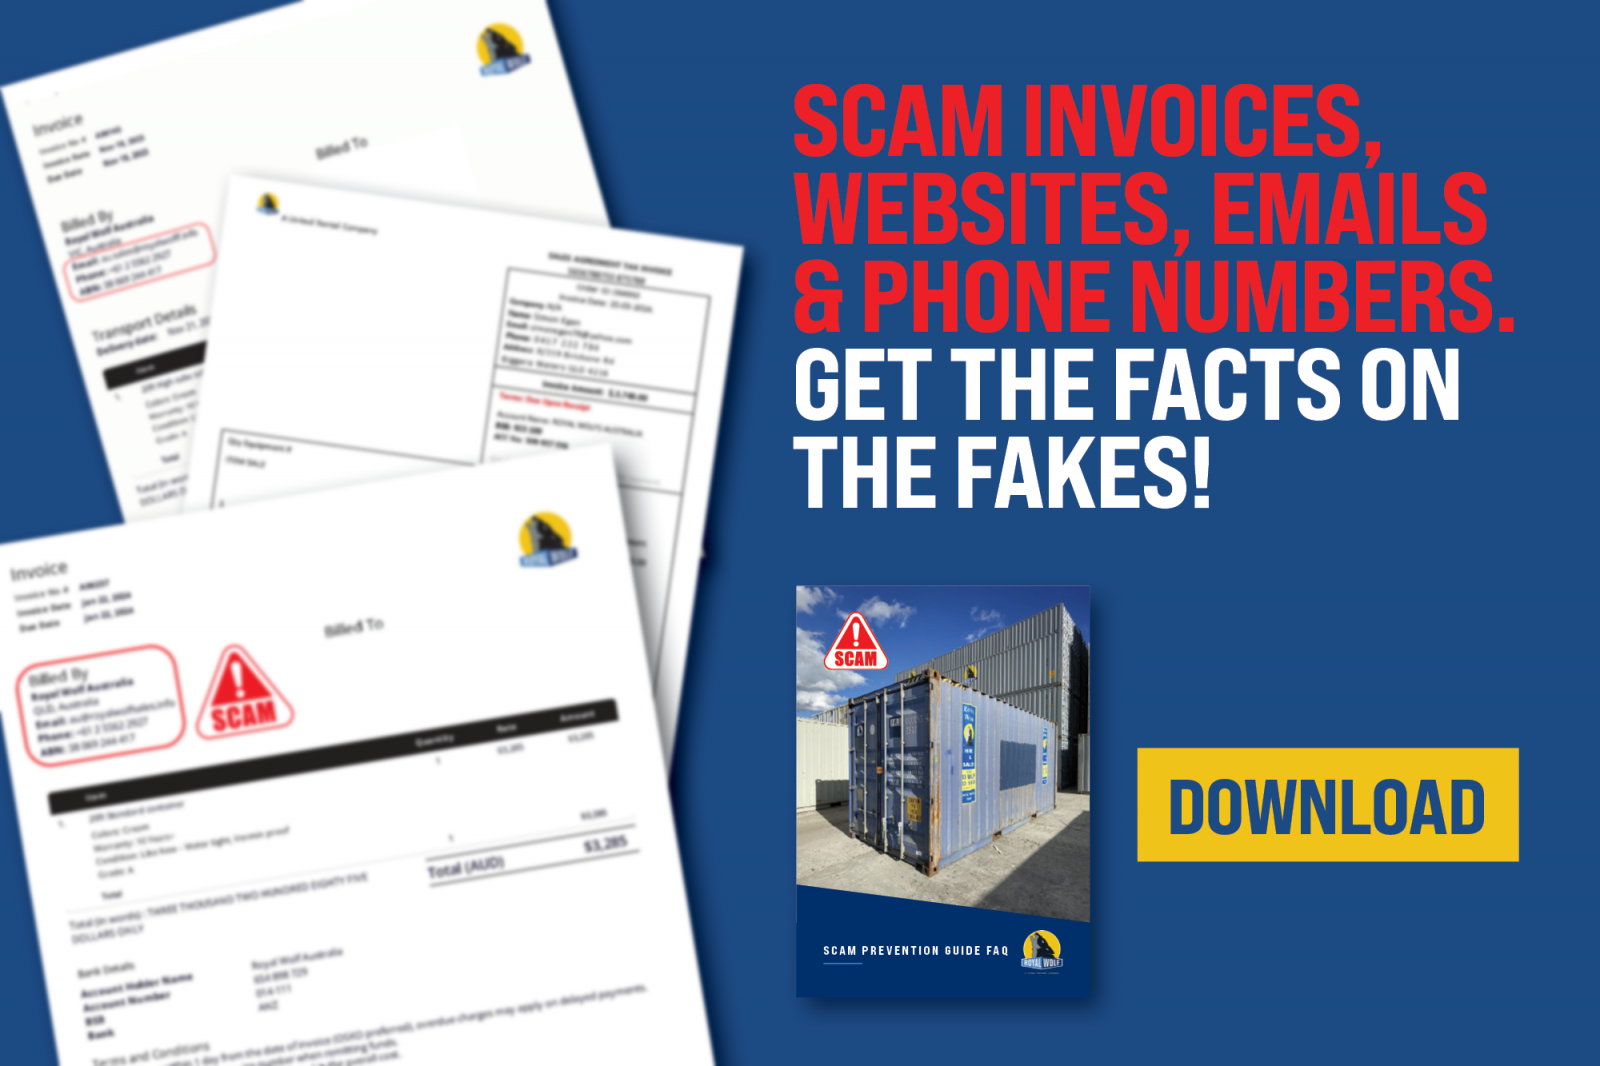 Scam Invoices, Websites, Emails and Phone Numbers. Get the facts on the fakes!